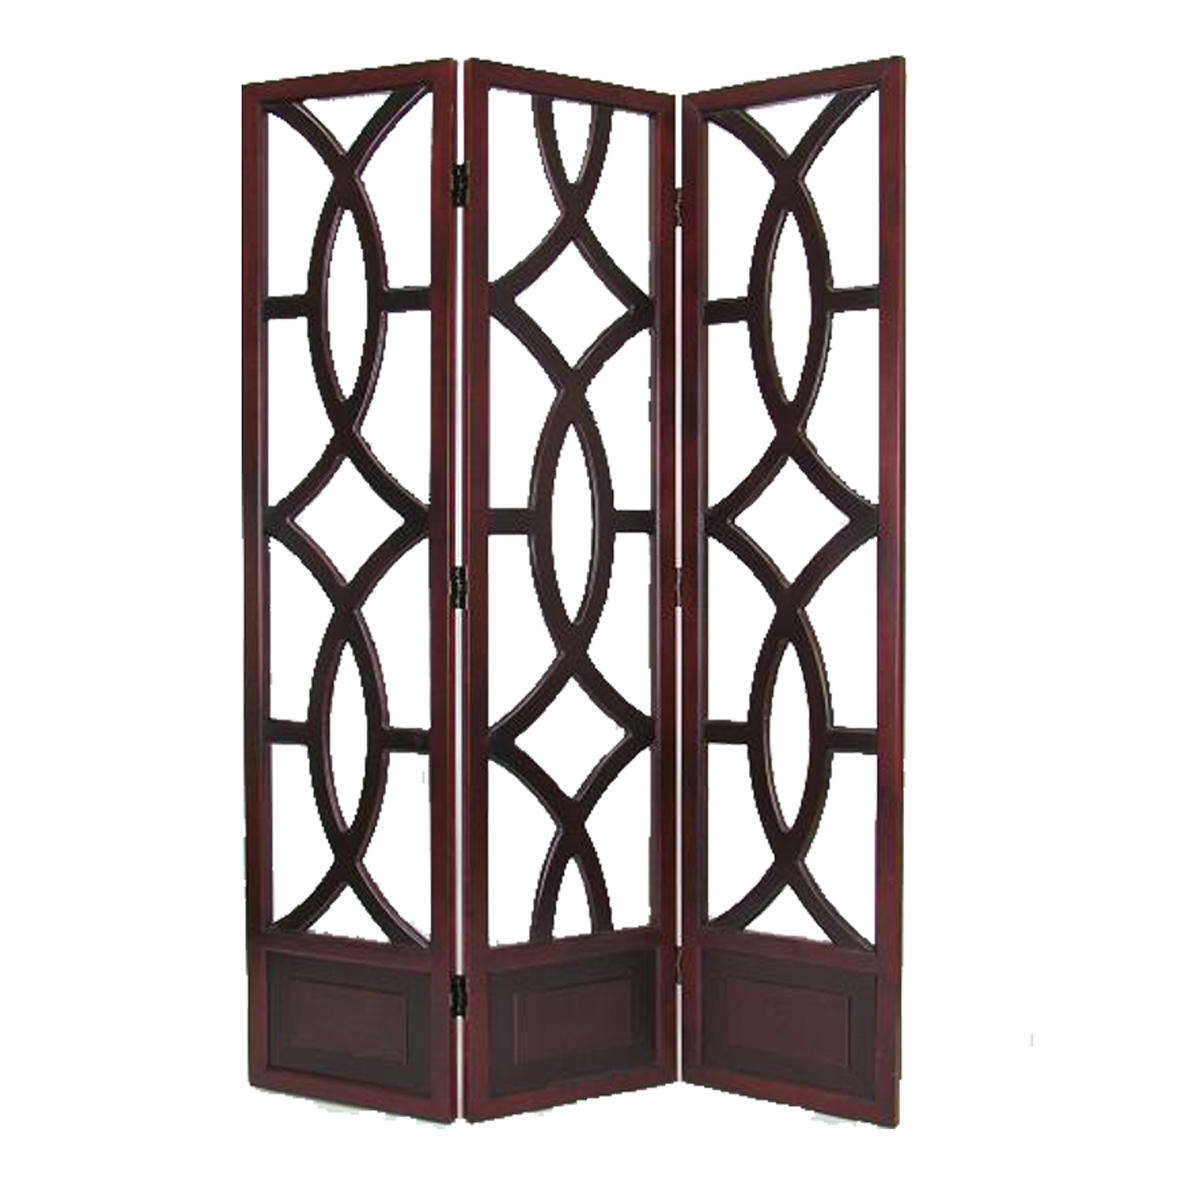 Open Cut Out Design 3 Panel Wooden Frame Screen With Double Hinges, Brown- Saltoro Sherpi